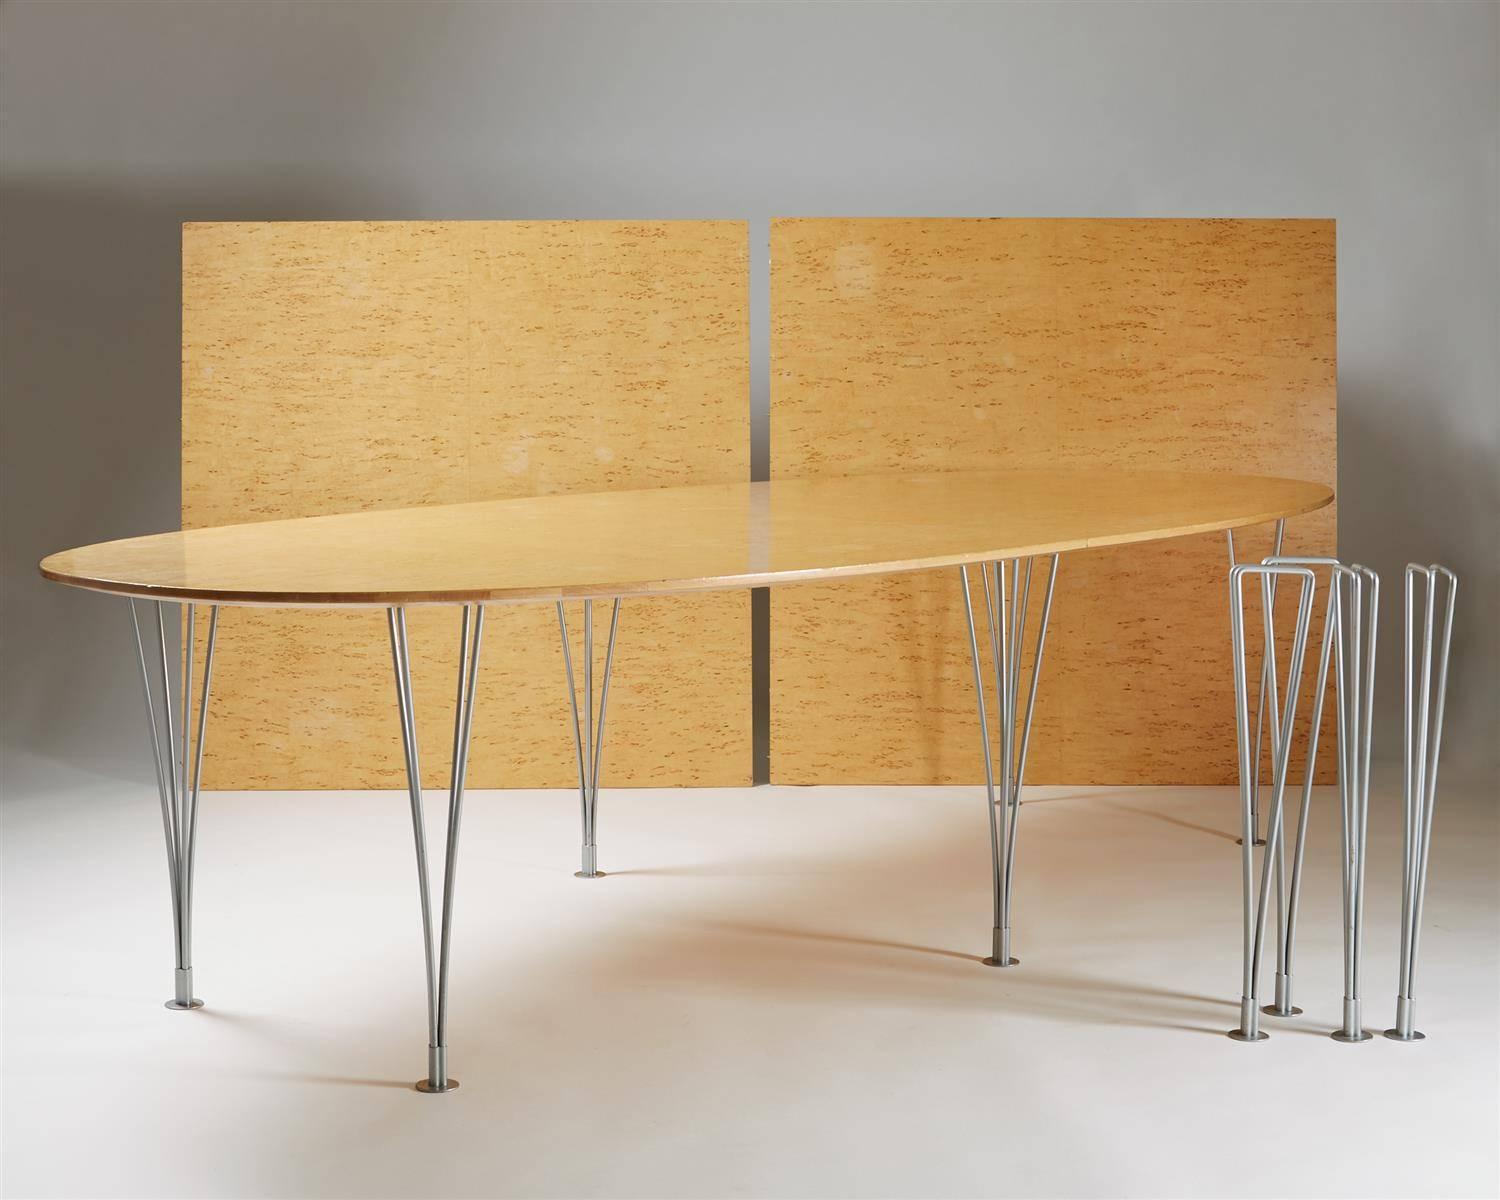 Large dining/conferance table designed by Bruno Mathsson for Mathsson International,	
Sweden. 1960's.

Karelian birch and chromed steel.
